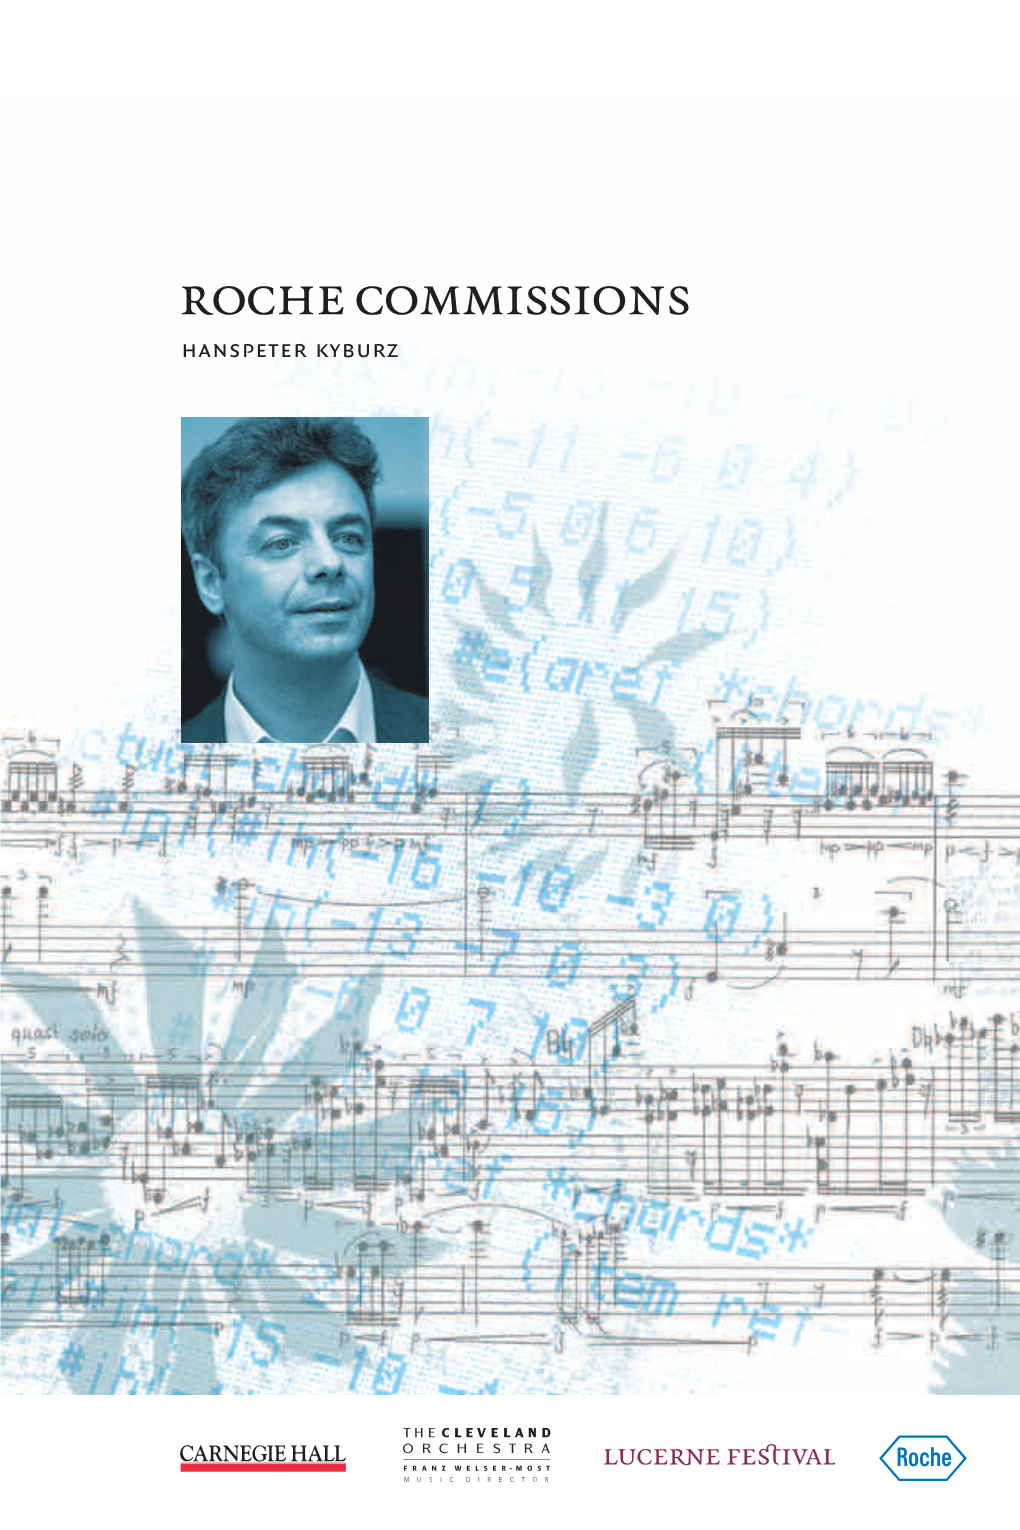 Roche Commissions Hanspeter Kyburz Roche Commissions Impressum